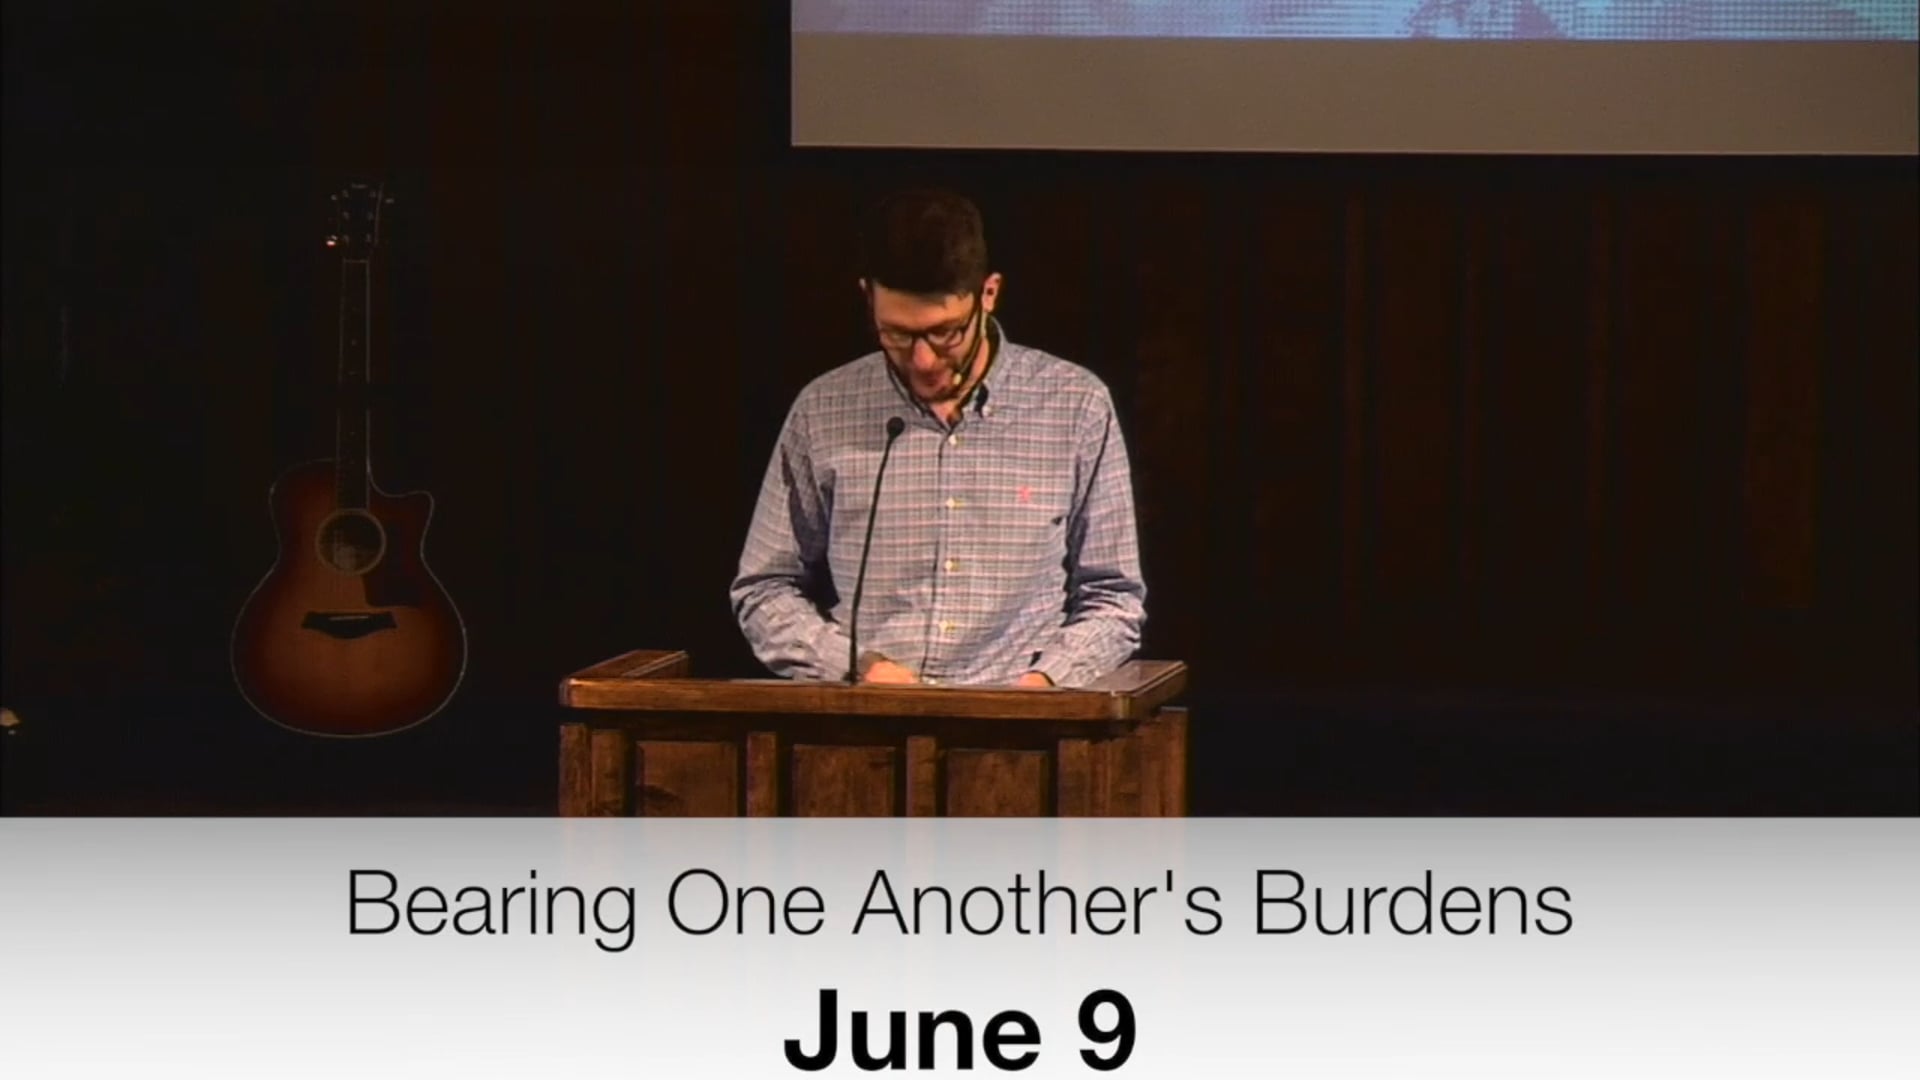 June 9 Bearing One Another's Burdens